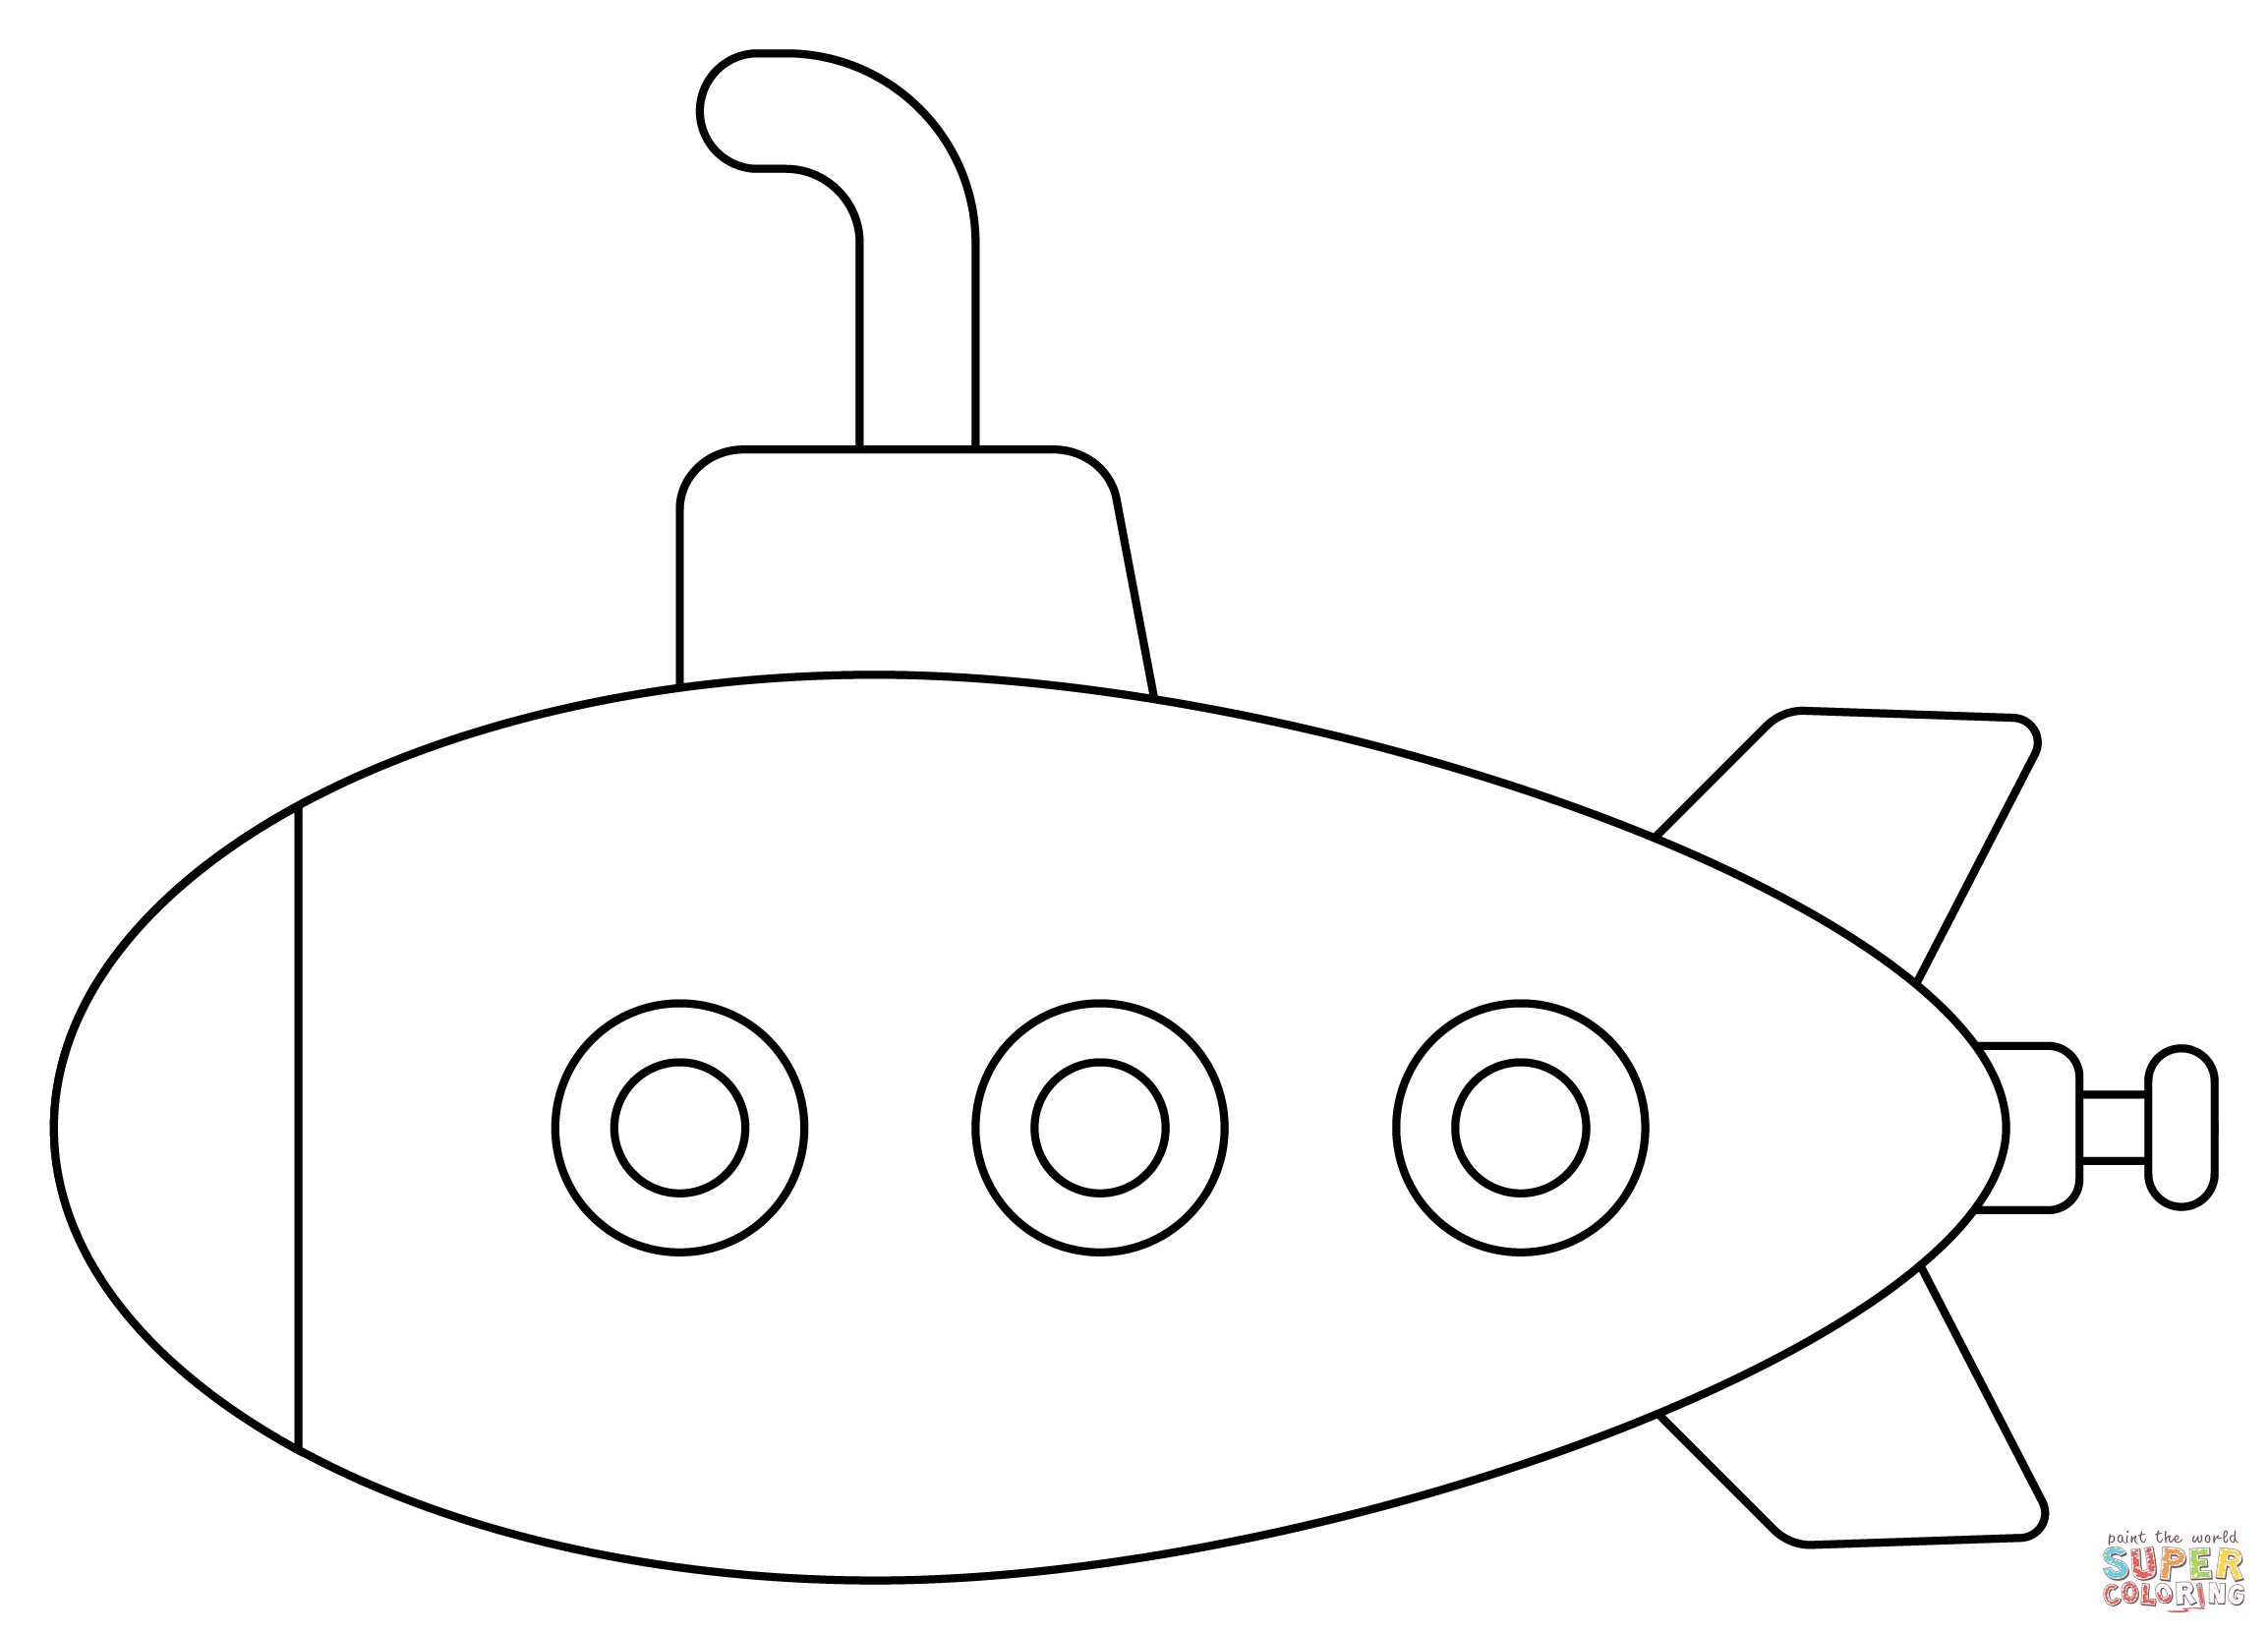 Submarine coloring page free printable coloring pages